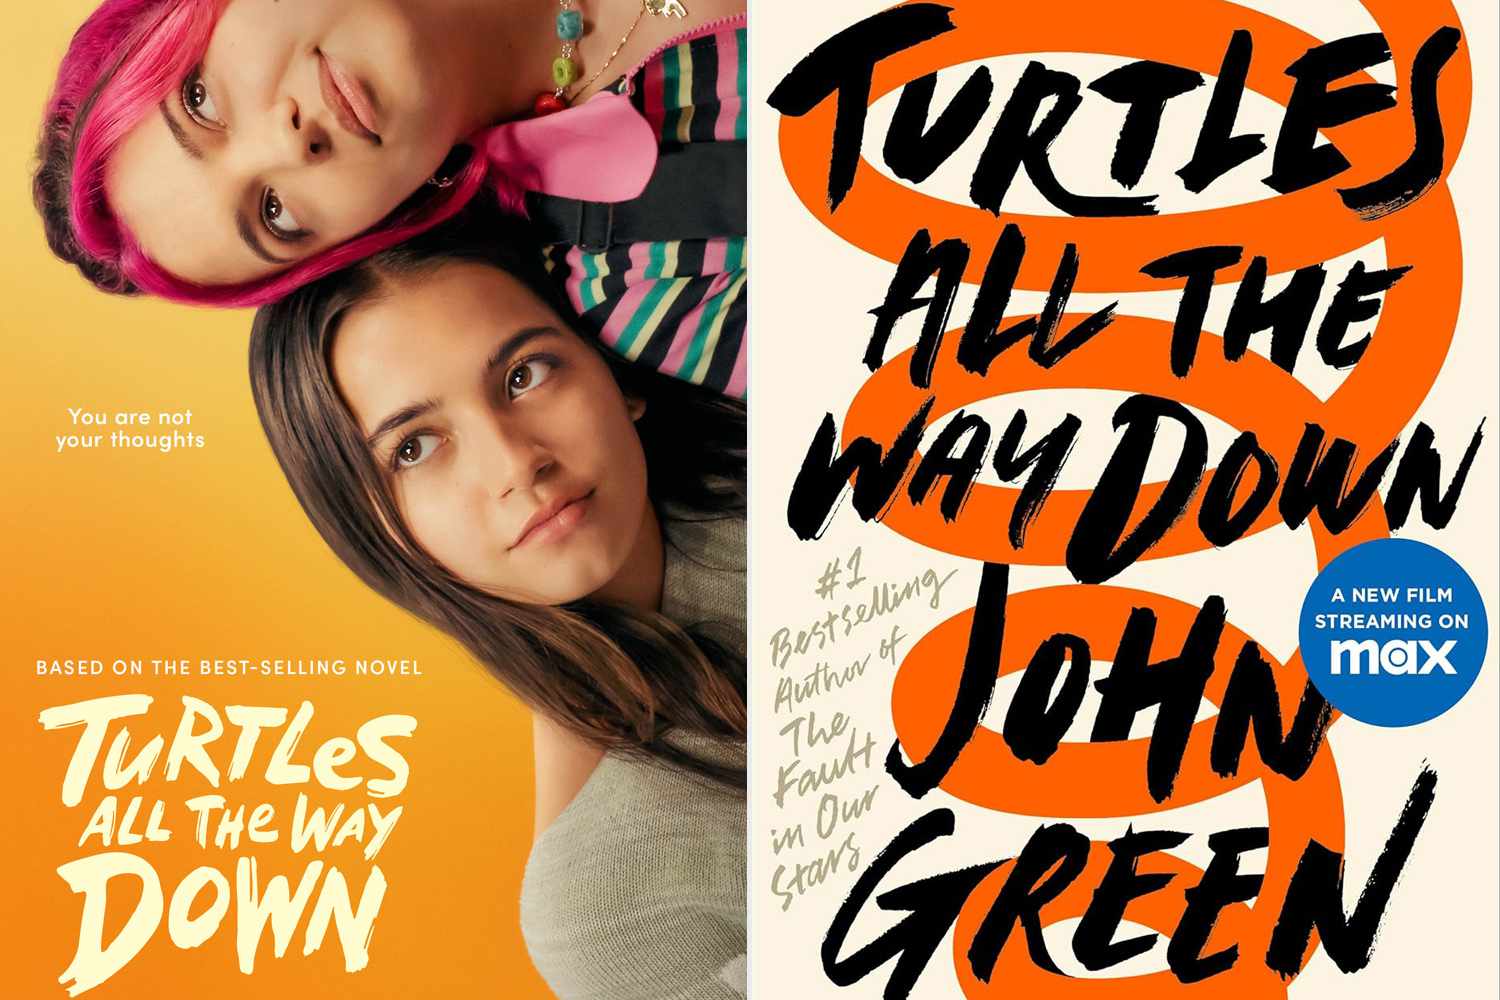 turtles all the way down (novel)